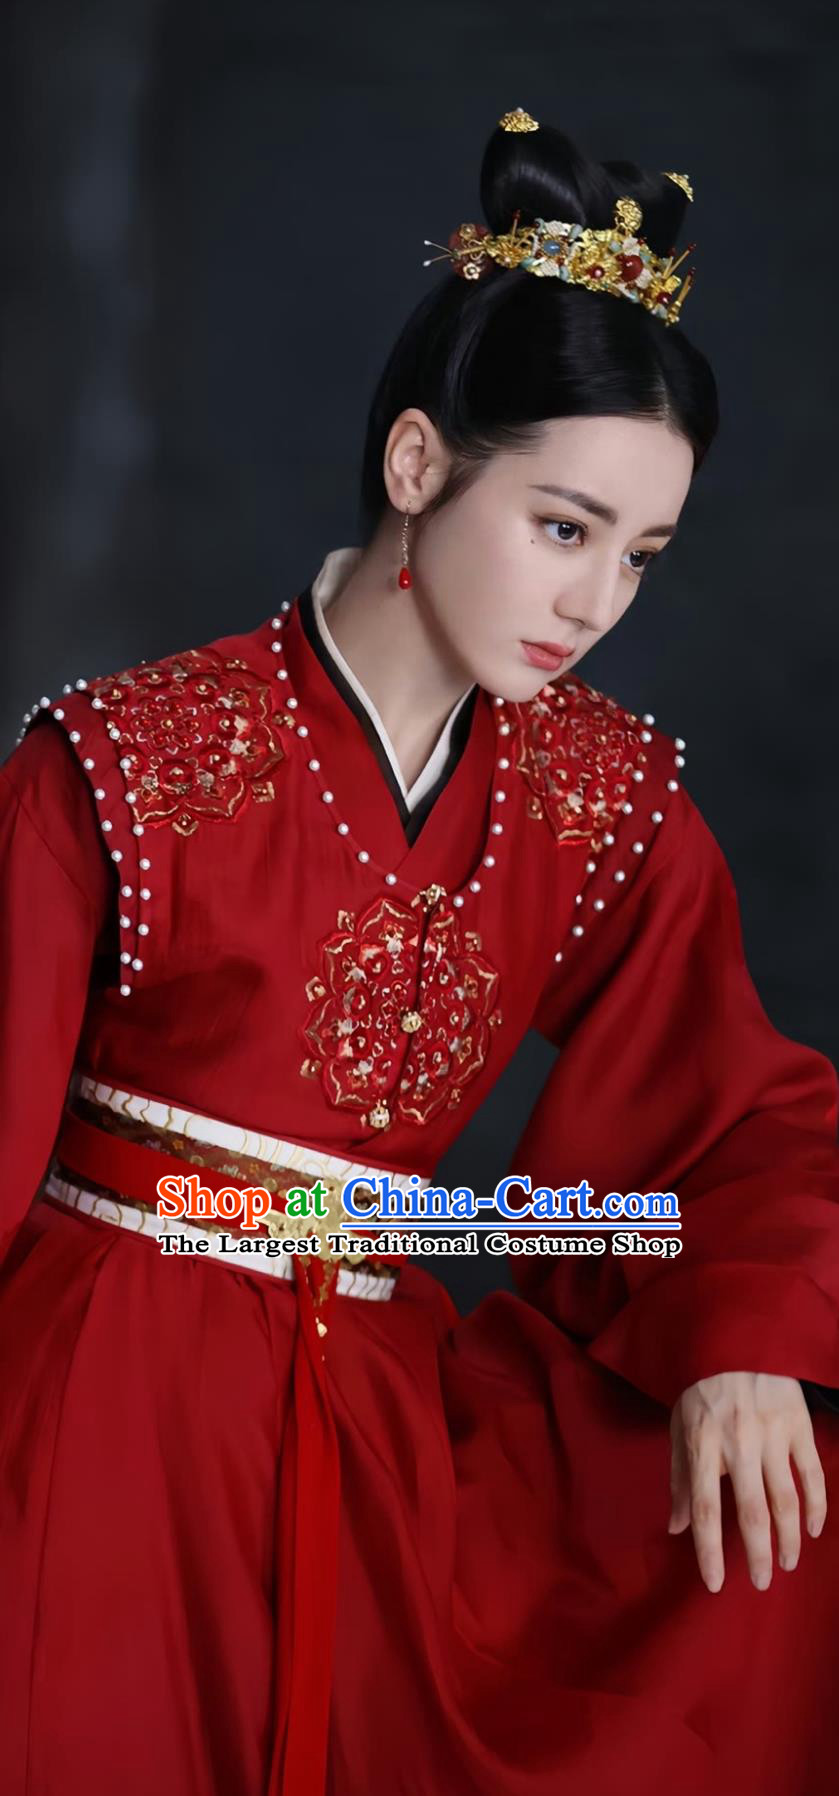 Ancient China Woman Clothing Traditional Hanfu TV Series The Legend of An Le Crown Princess Ren An Le Red Dress